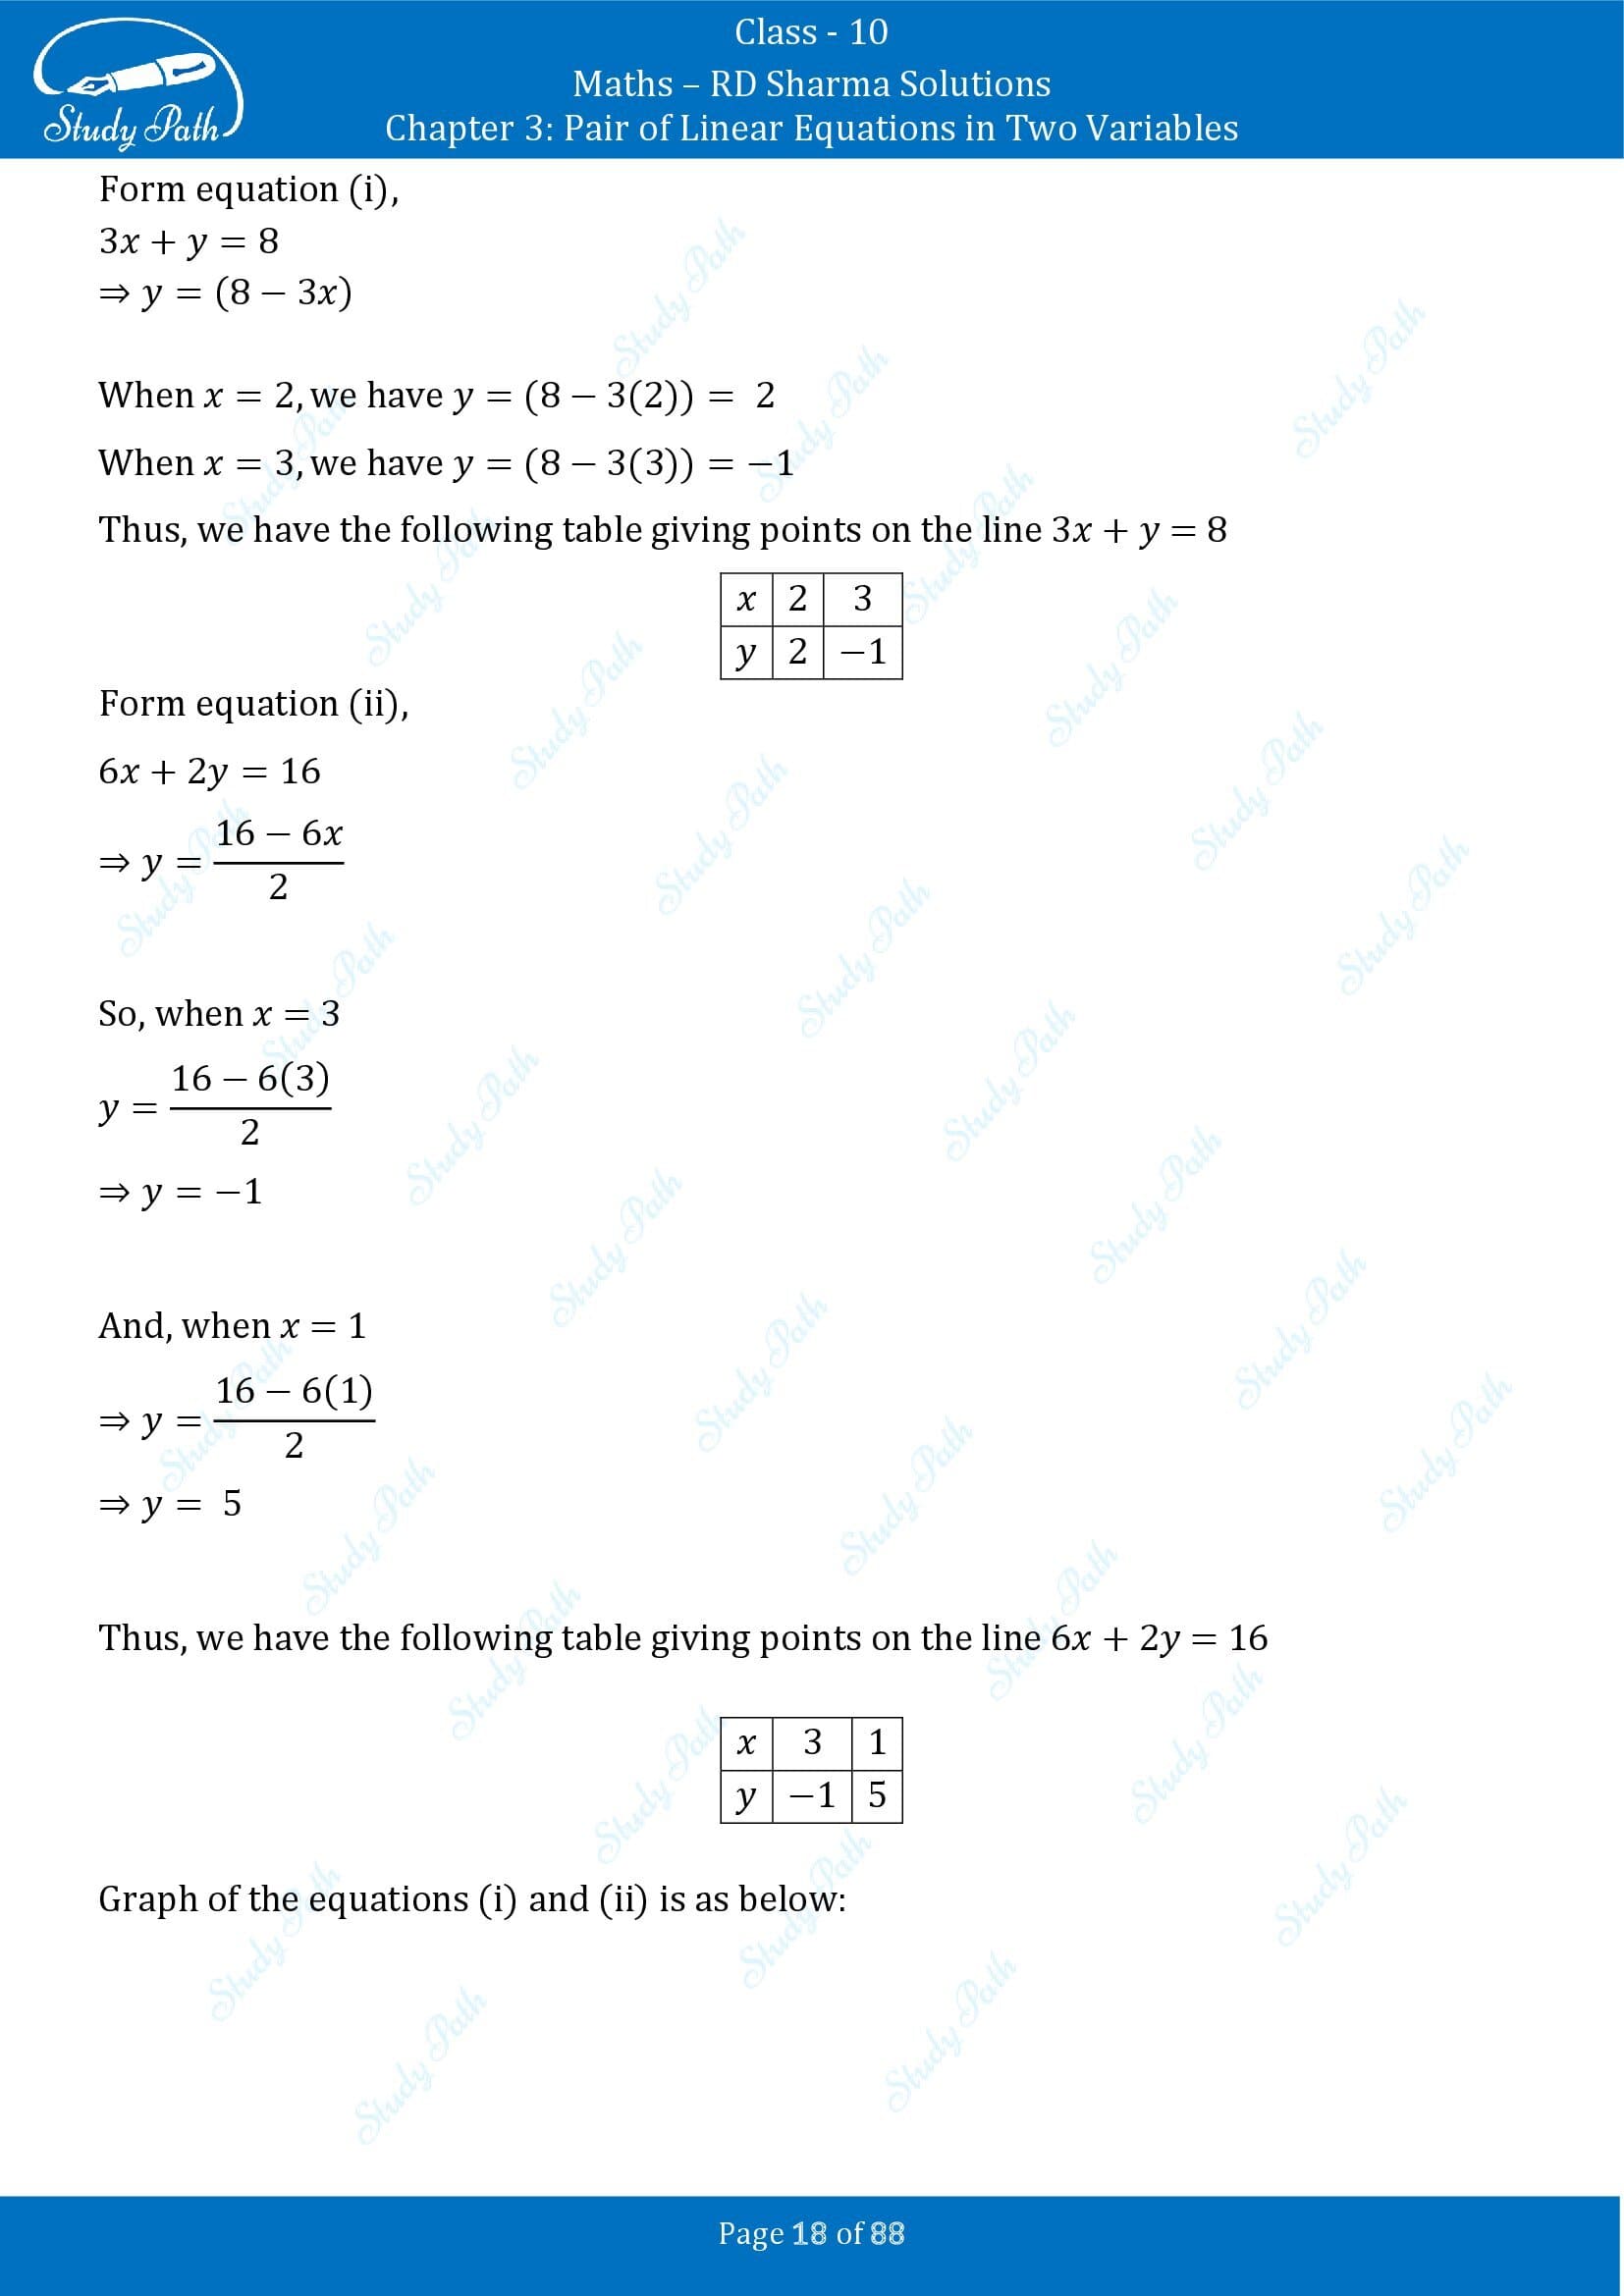 RD Sharma Solutions Class 10 Chapter 3 Pair of Linear Equations in Two Variables Exercise 3.2 00018